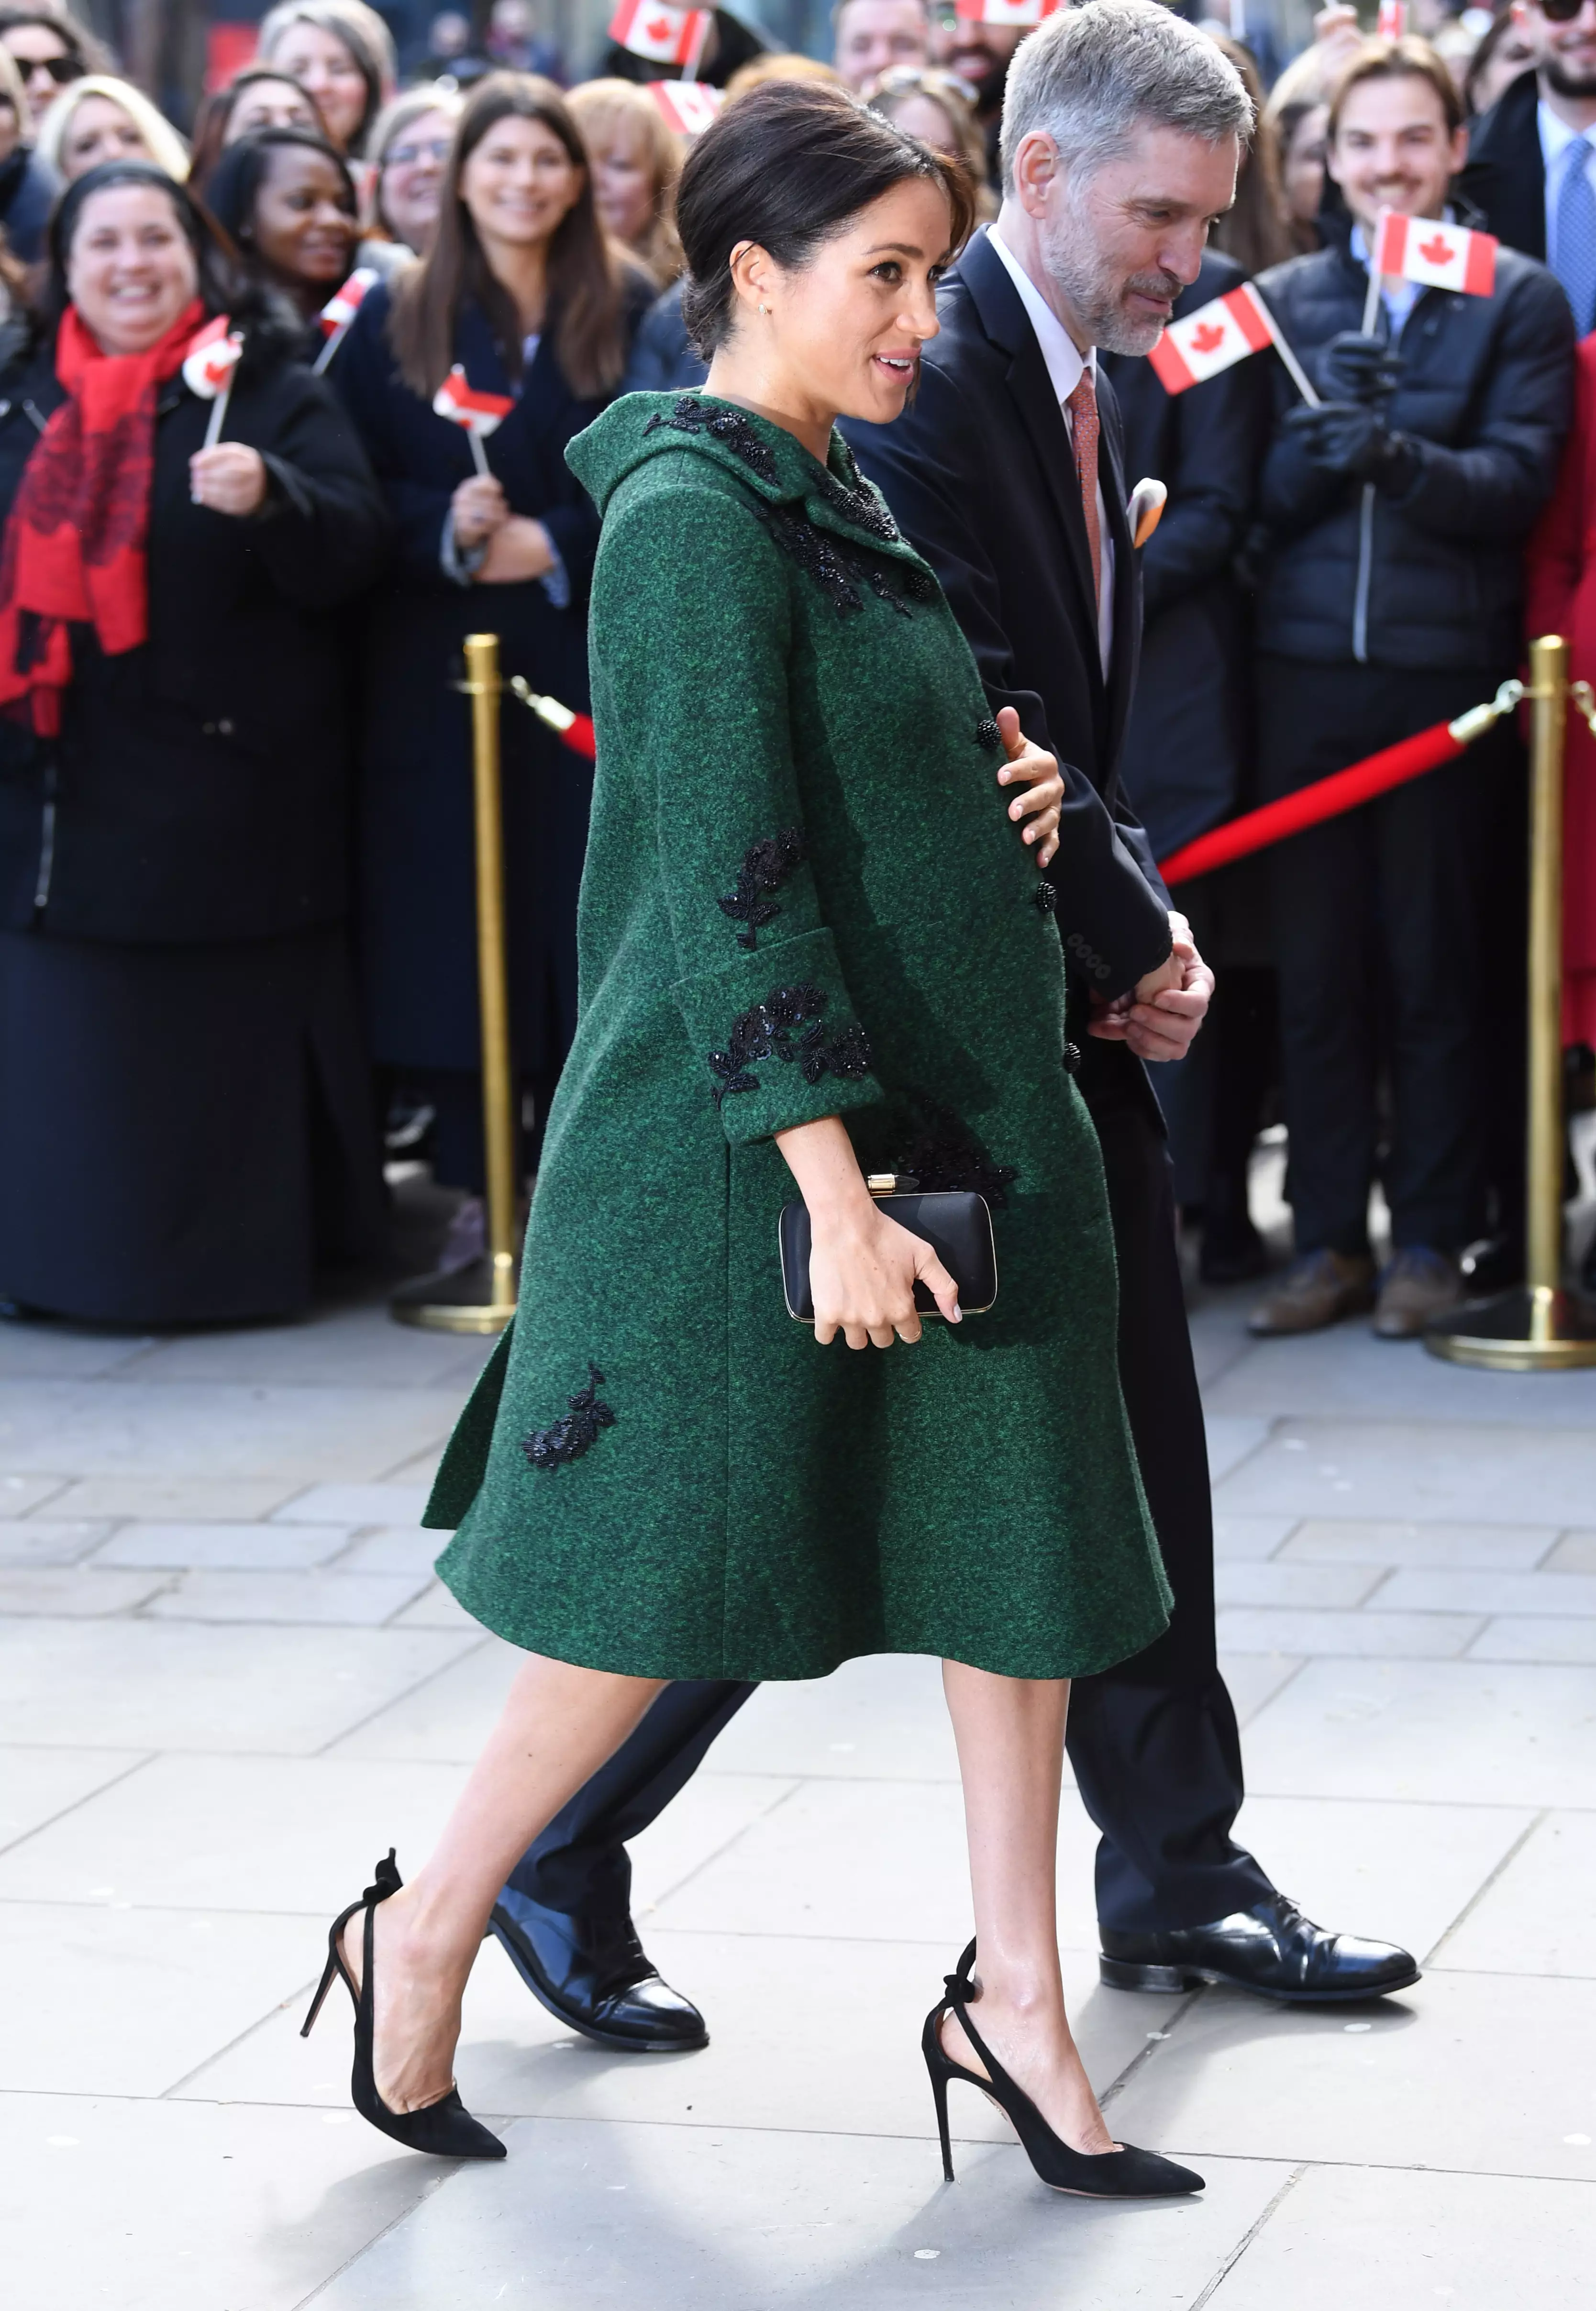 Meghan Markle touching her bump while pregnant with baby Archie in March 2019 (